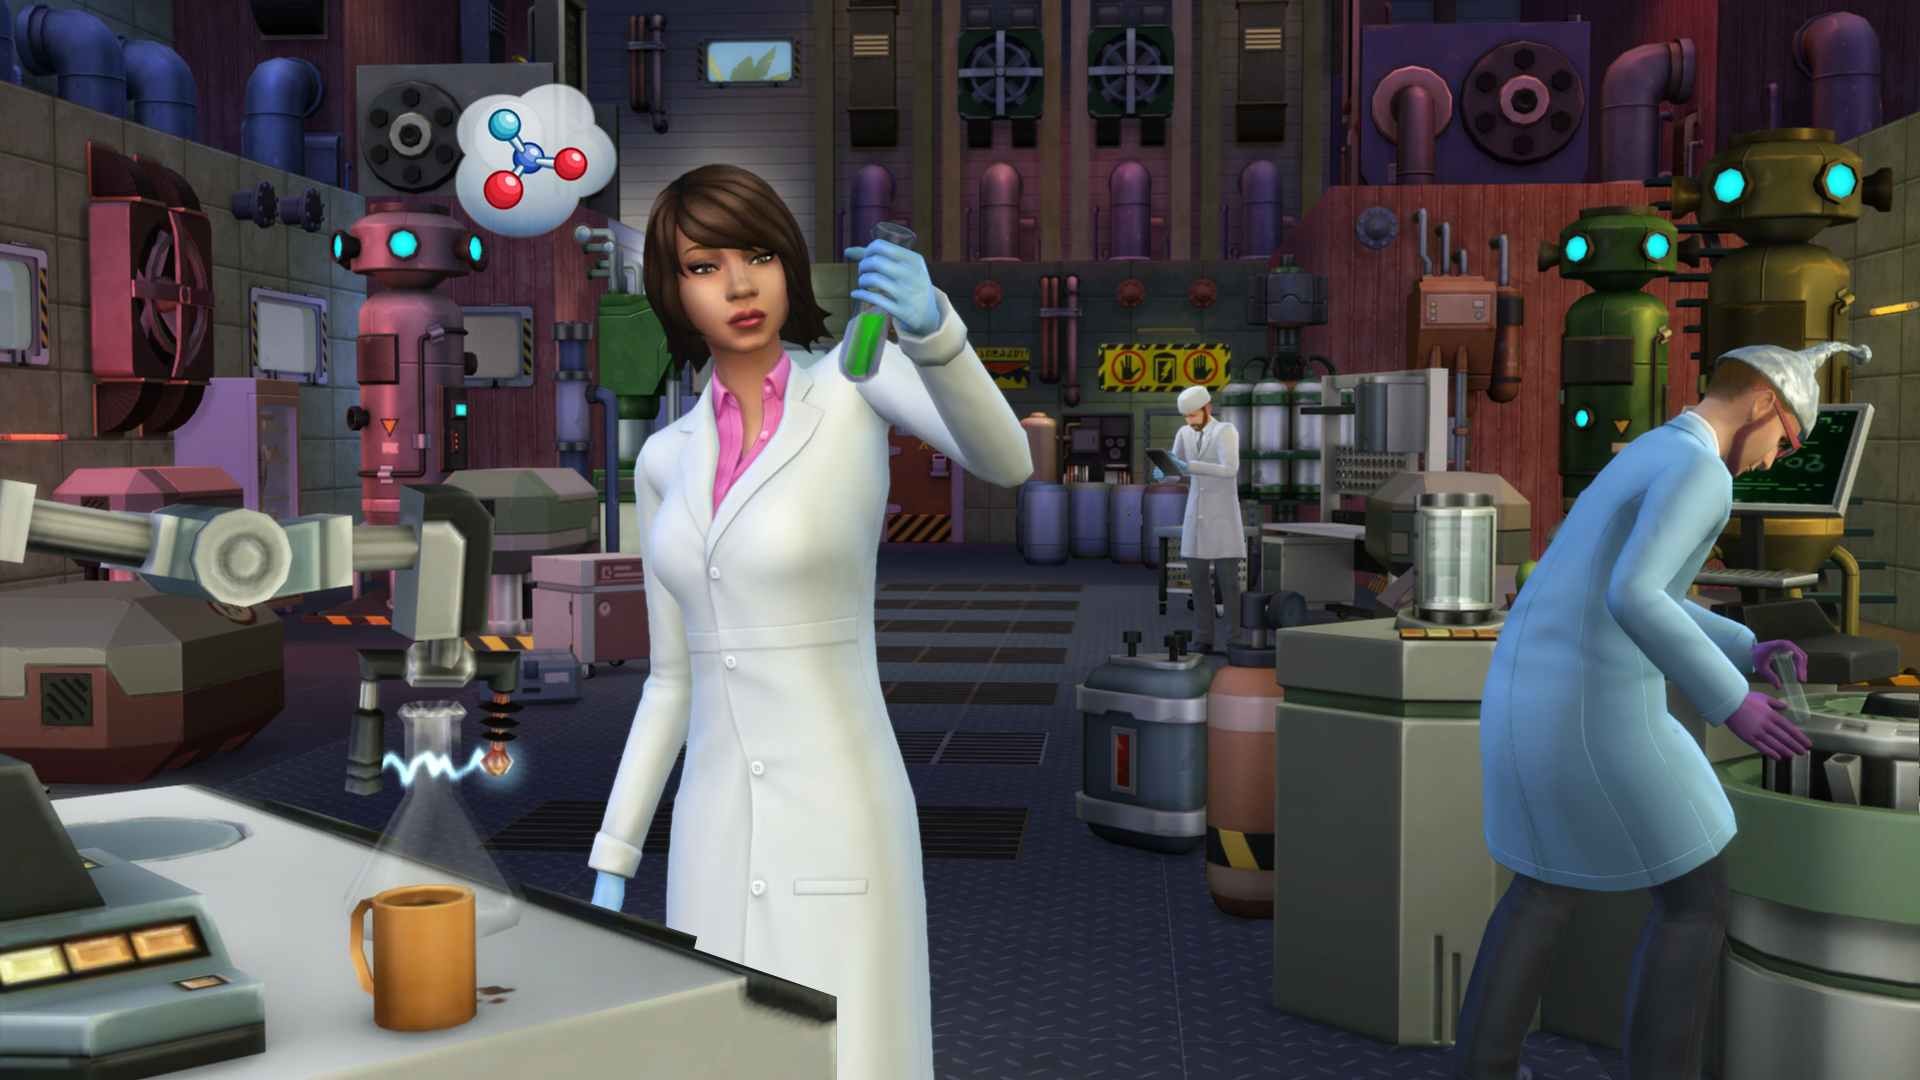 The Sims 4 Get to Work